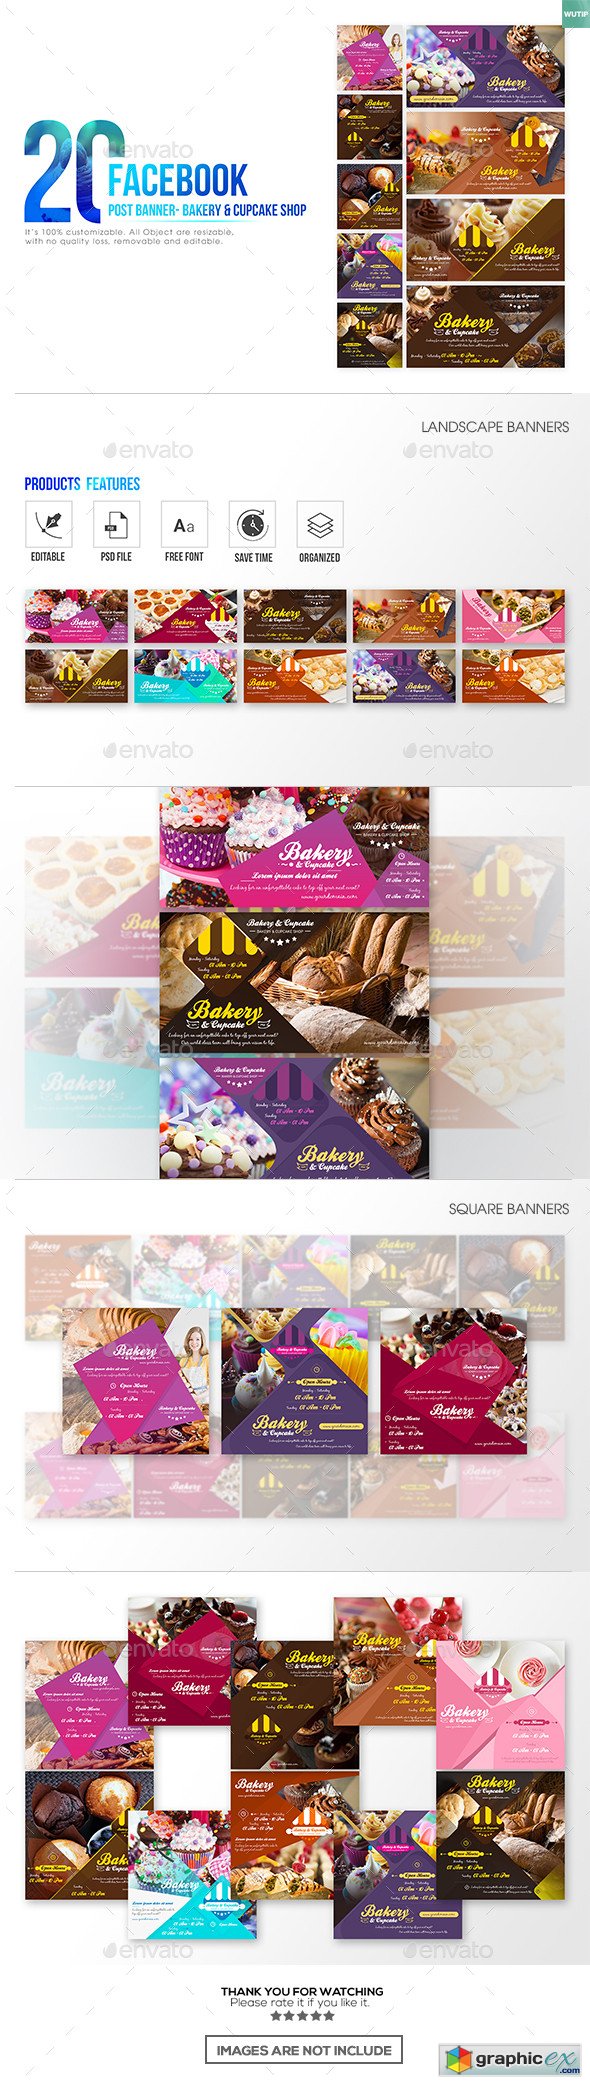 20 Facebook Post Banner - Bakery and Cupcake Shop